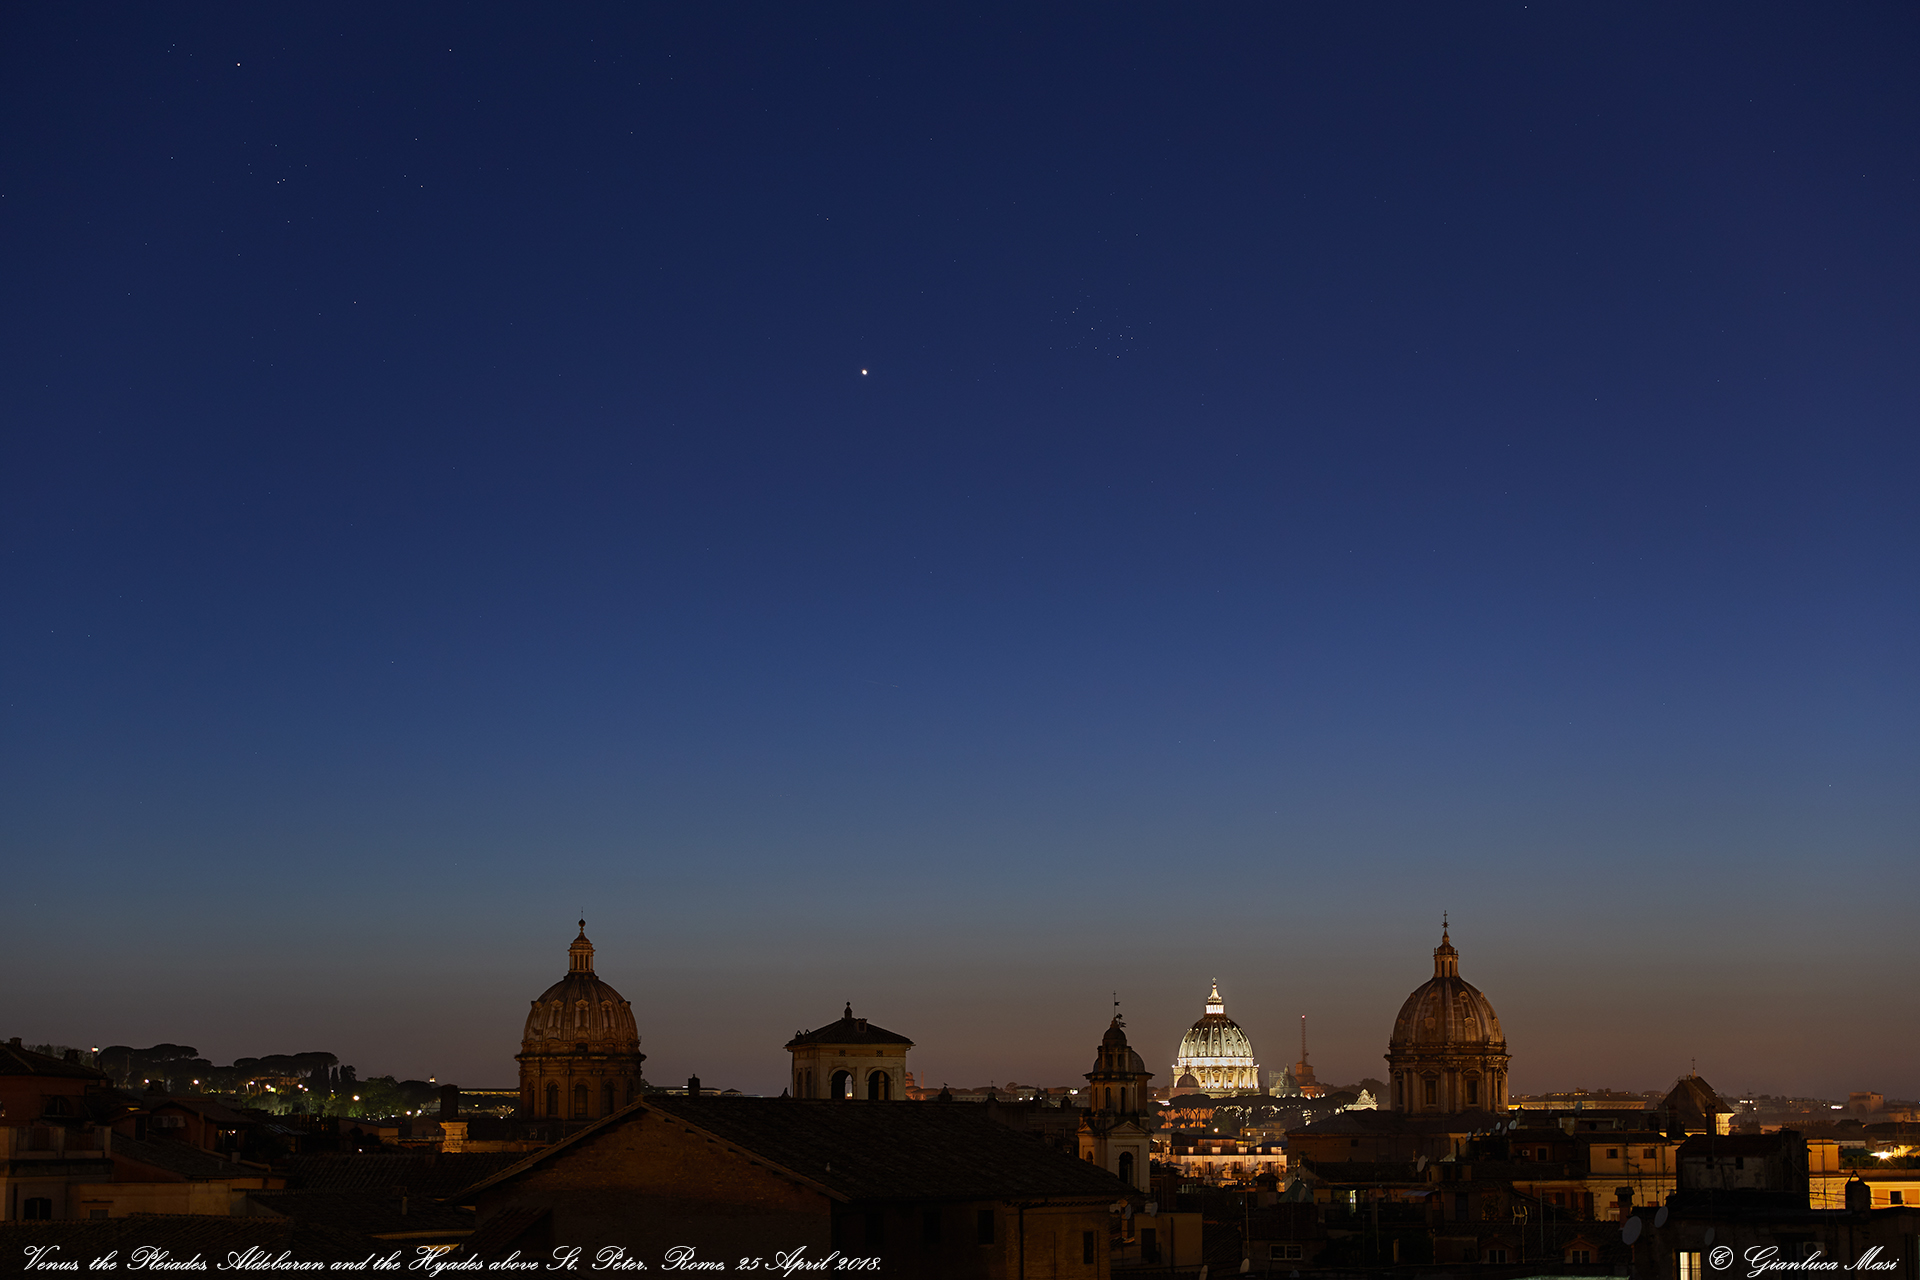 Venus, the Pleiades, Aldebaran and the Hyades above St. Peter. Rome, 25 April 2018. © Gianluca Masi